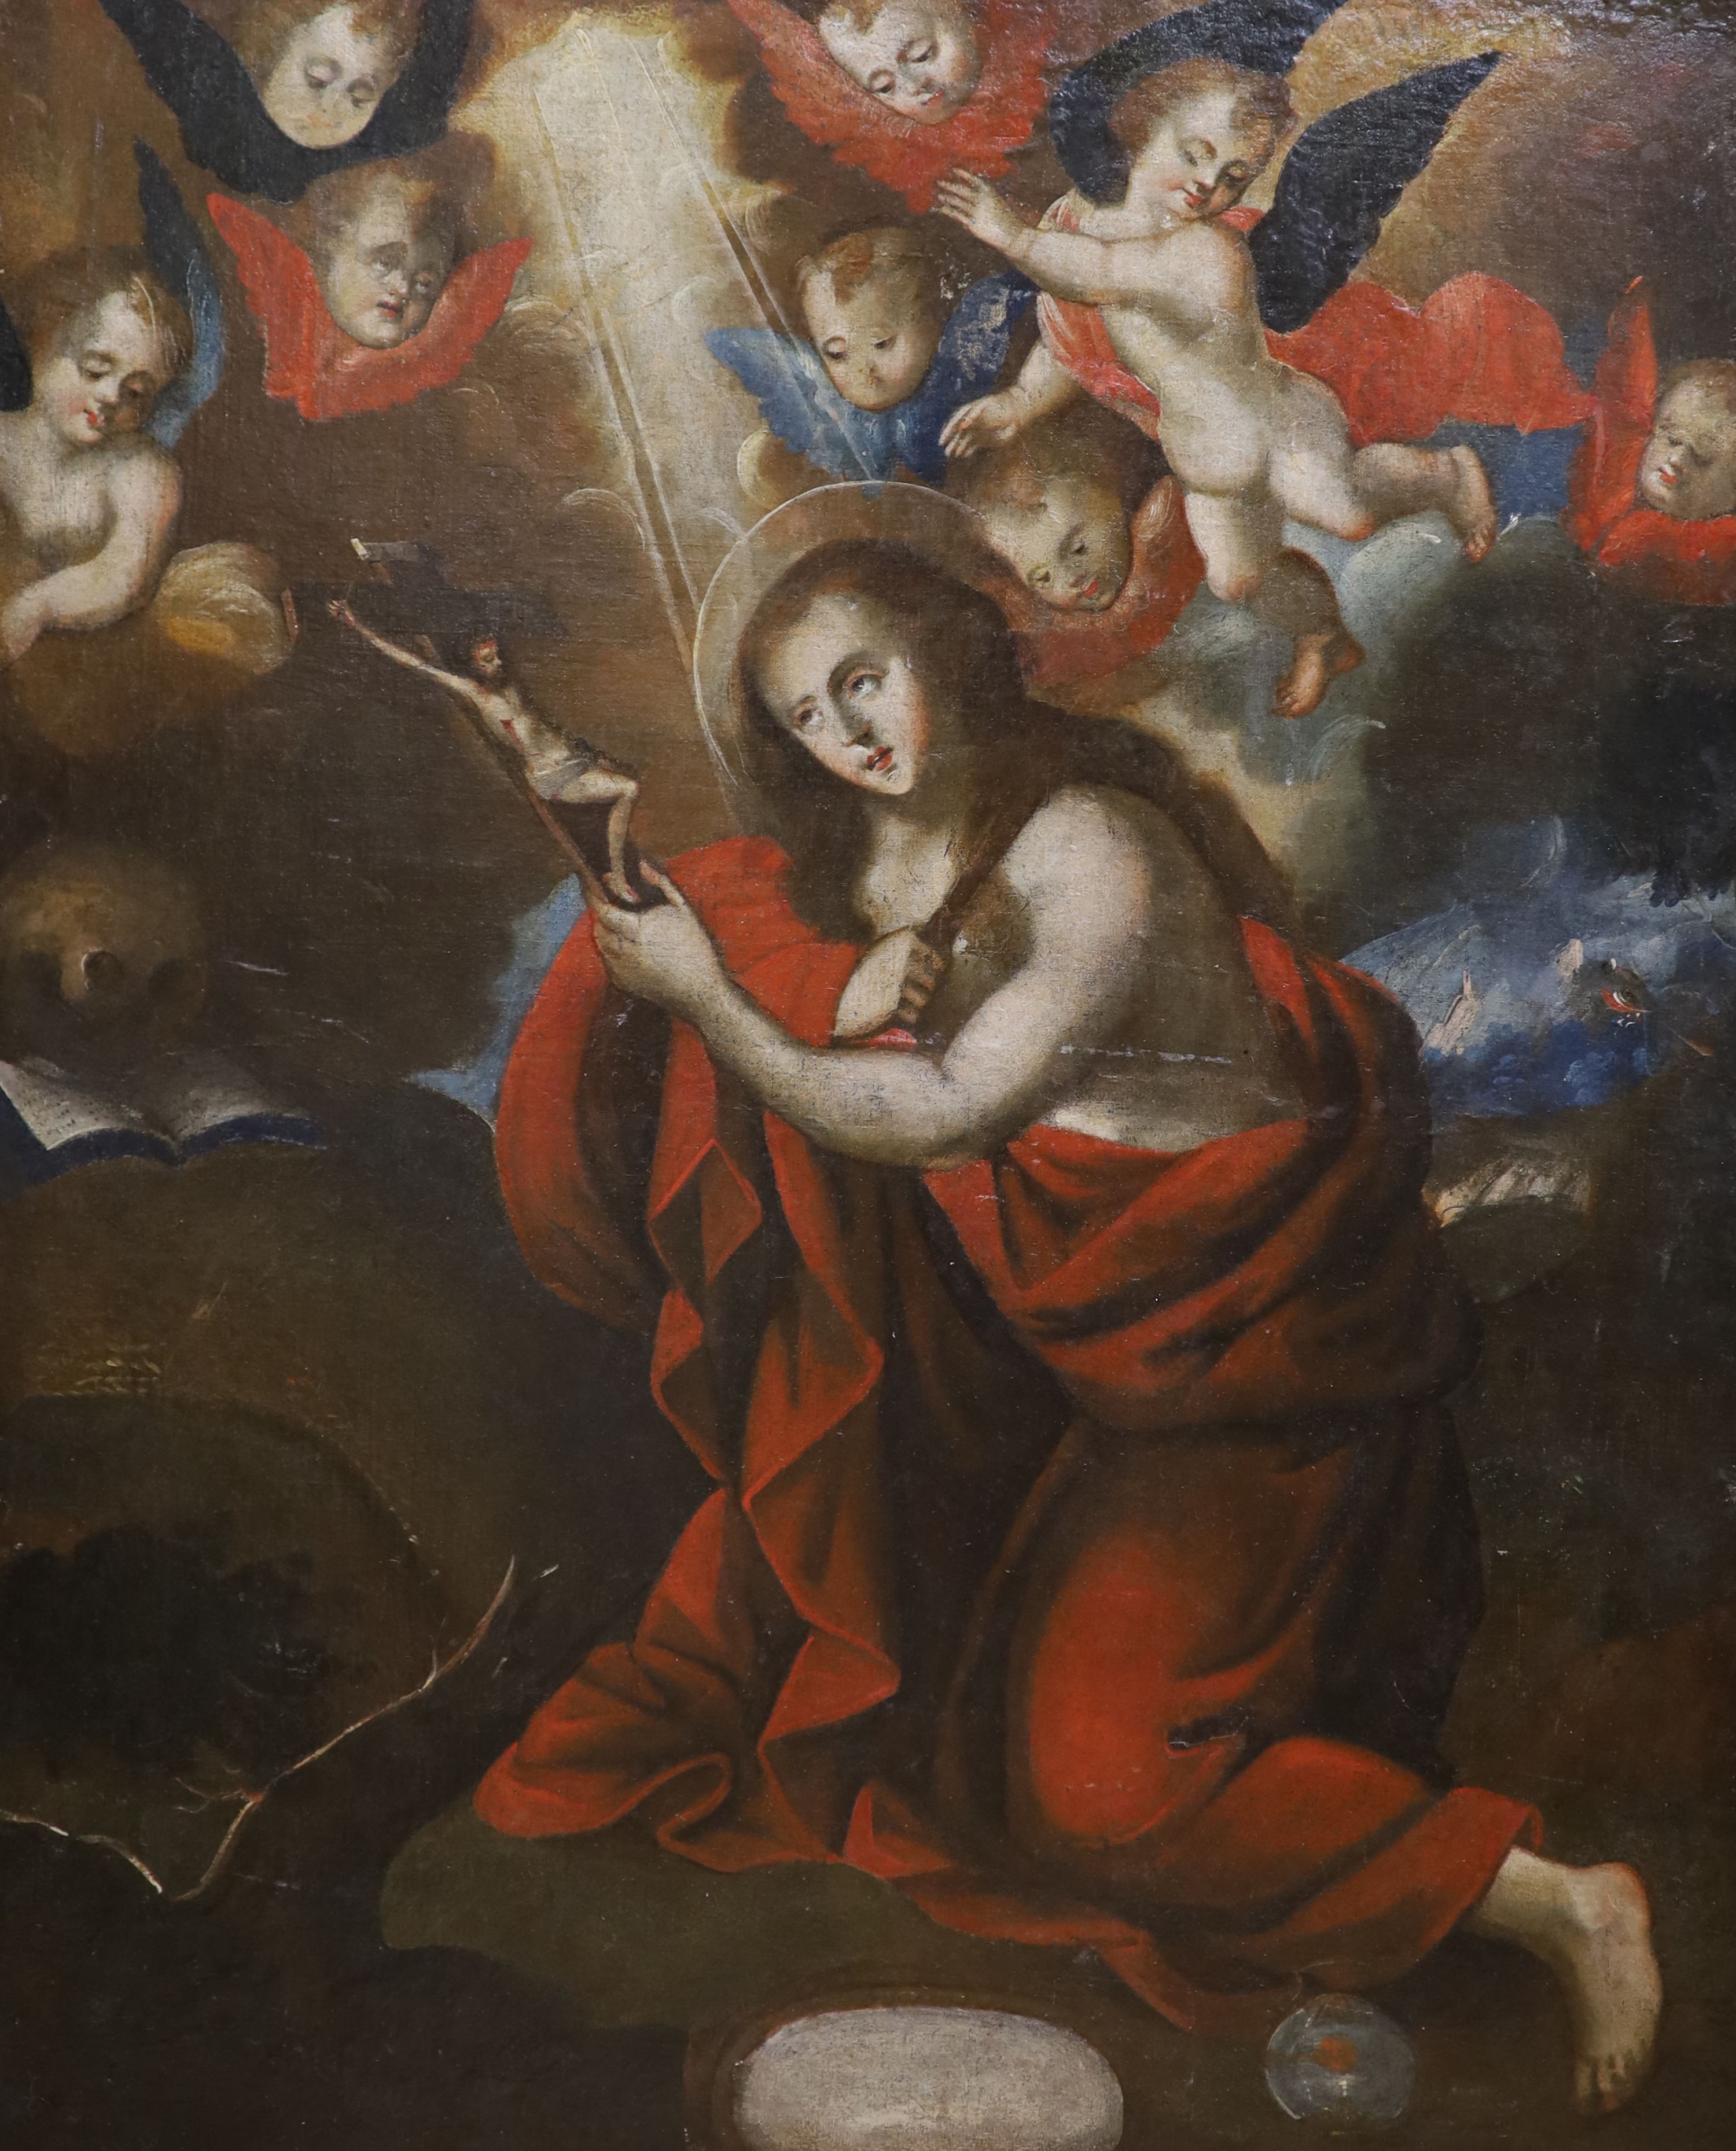 Italian, late 17th / early 18th century, biblical narrative, study of a female saint, kneeling with a crucifix below angels in flight descending from the heavens, 80 x 68 cm, unframed.